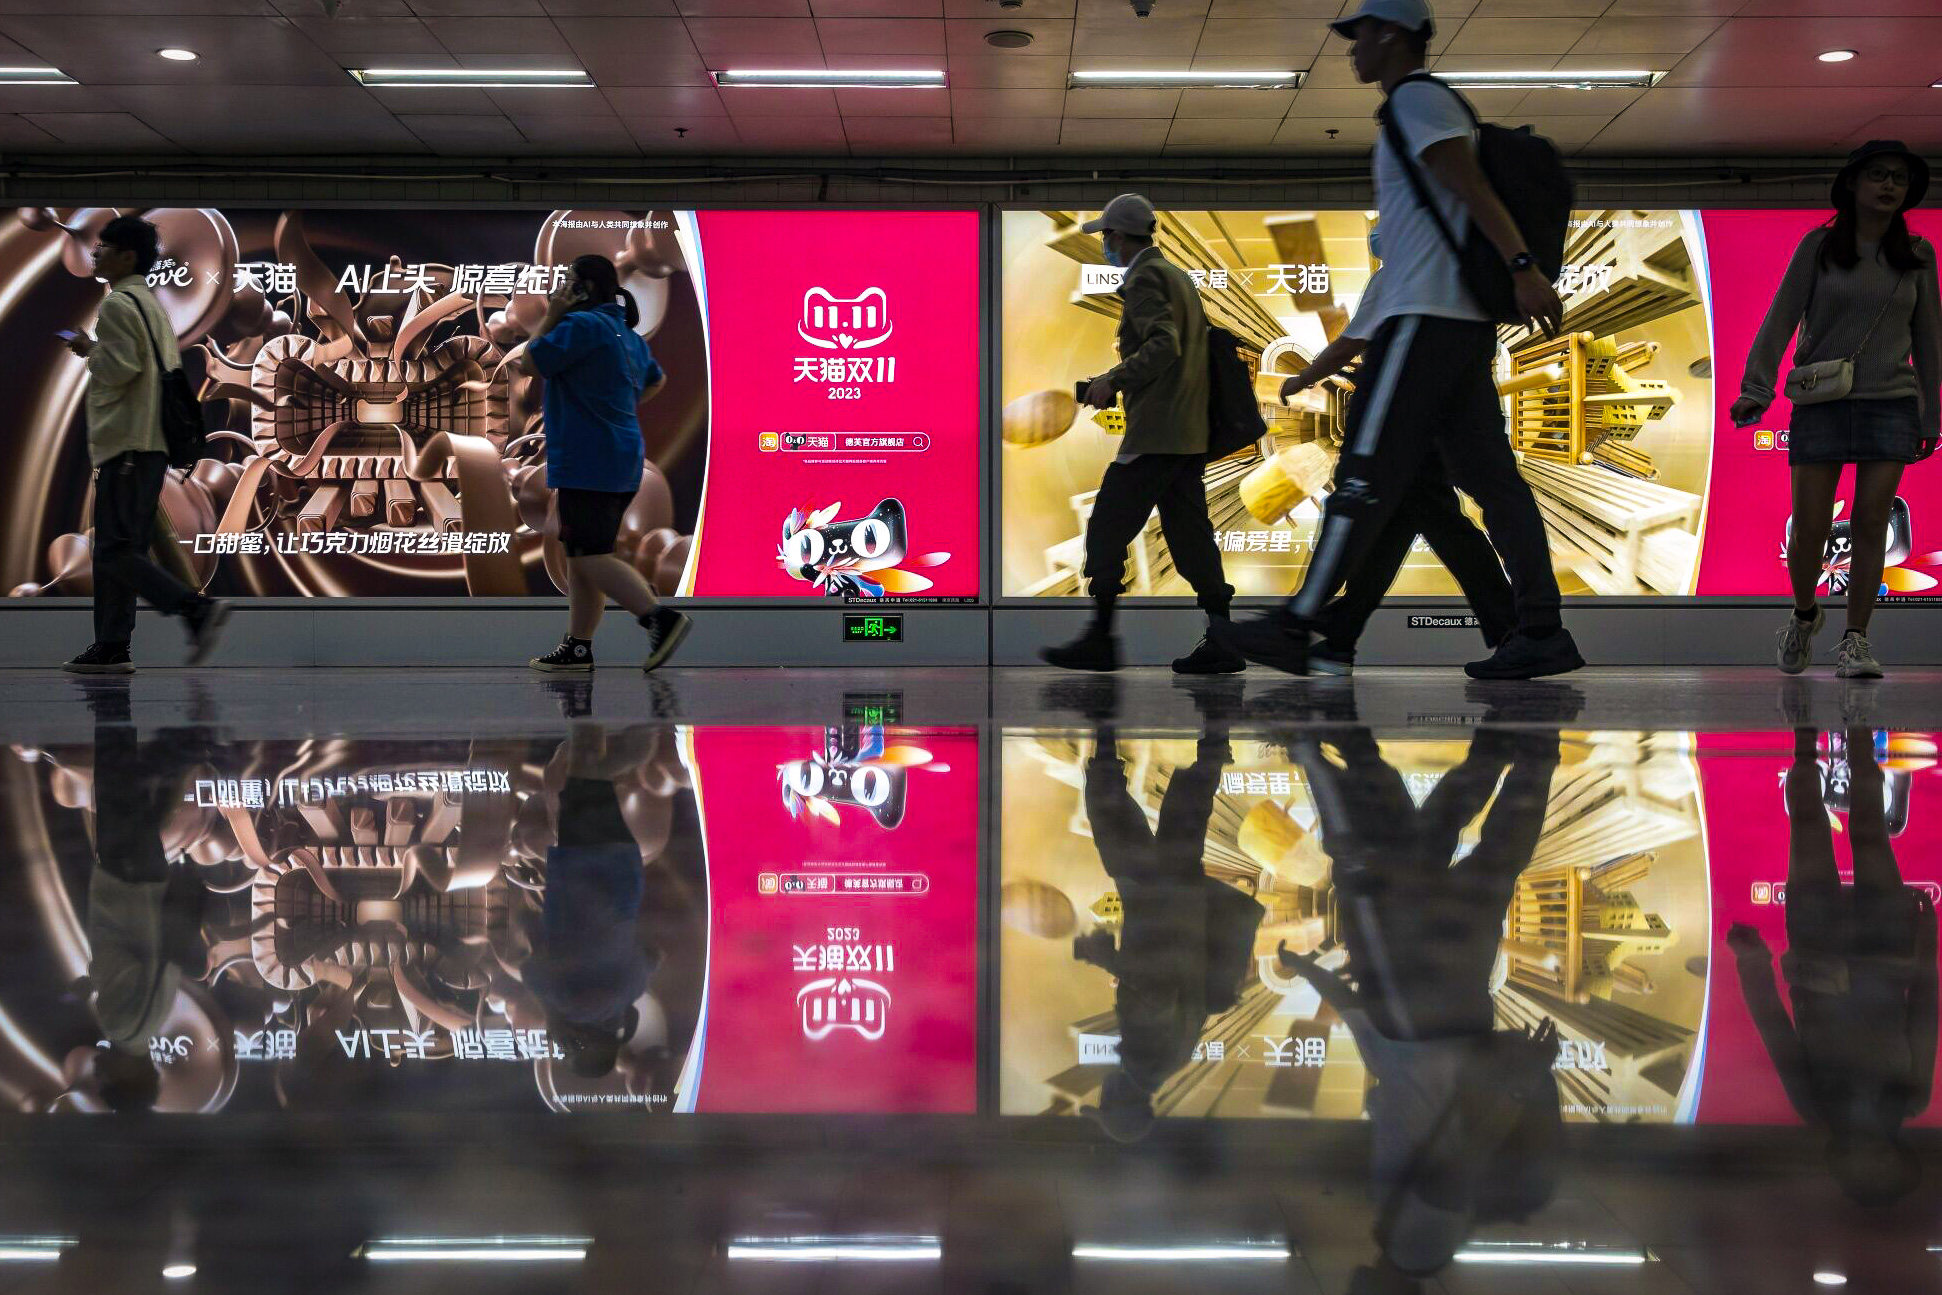 An advertisement for the Singles’ Day shopping event on Alibaba Group Holding Ltd.’s Tmall e-commerce platform at a subway station in Shanghai, China, on Saturday, Nov. 4, 2023. Alibaba and Tencent Holdings Ltd. would team up in the upcoming Singles’ Day shopping festival, Alibaba’s signature annual event that dwarfs Black Friday in size and growth. Photo: Bloomberg